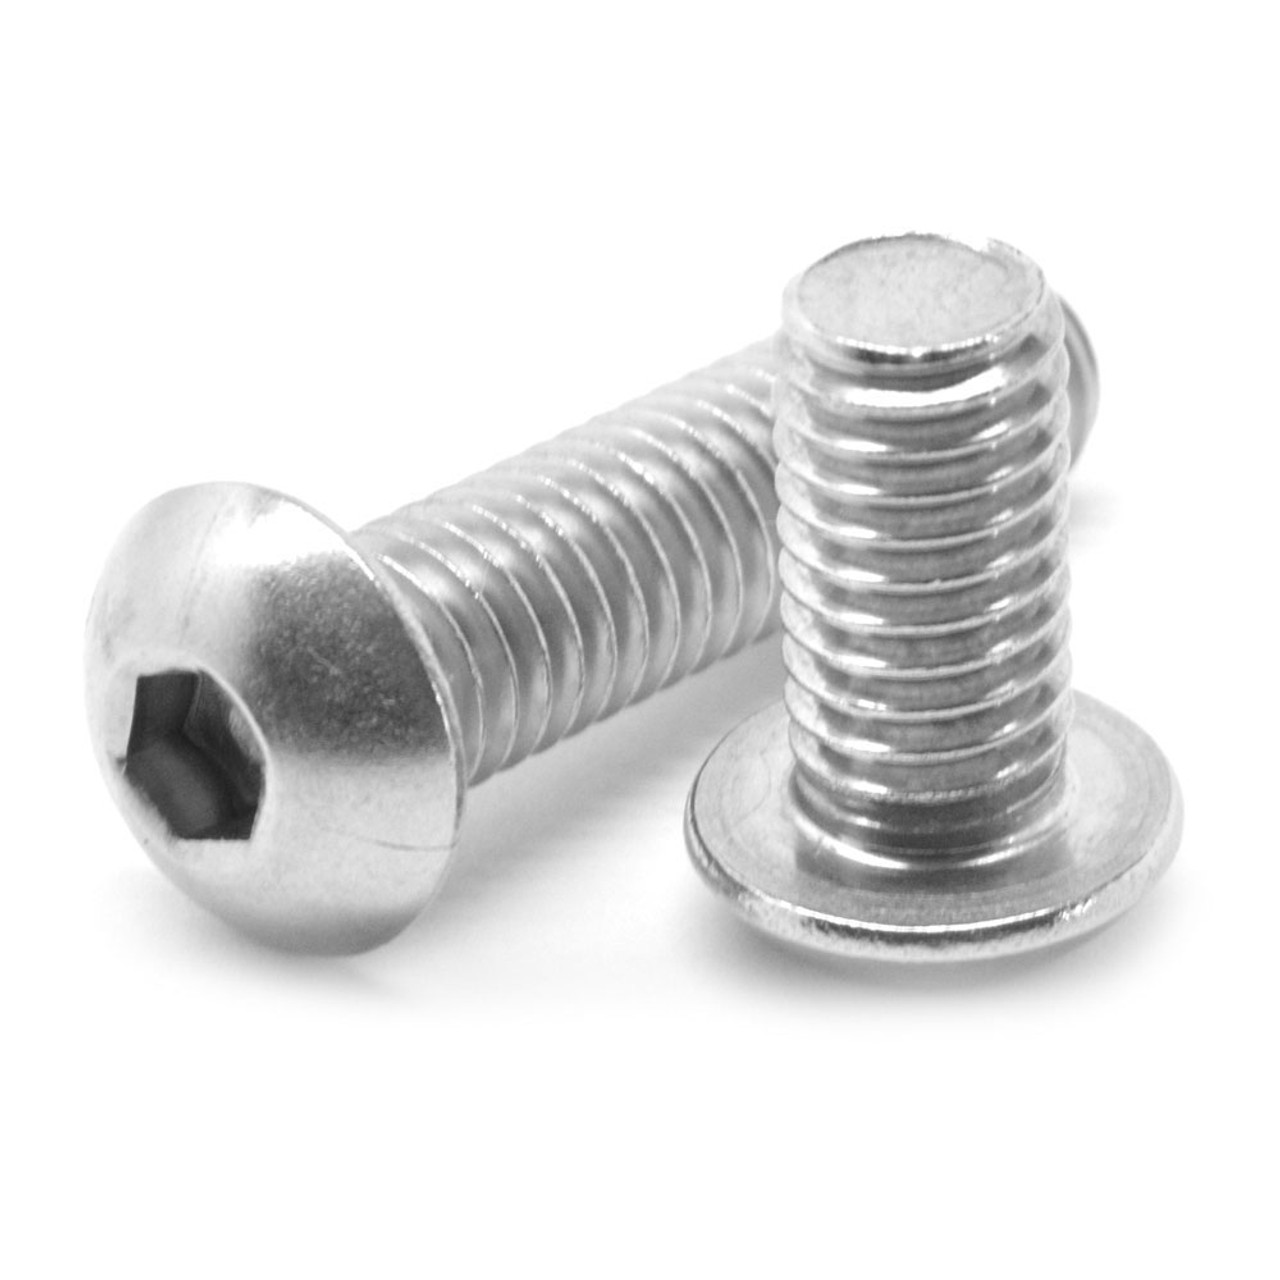 M5 x 0.80 x 35 MM (FT) Coarse Thread ISO 7380 Socket Button Head Cap Screw Stainless Steel 18-8